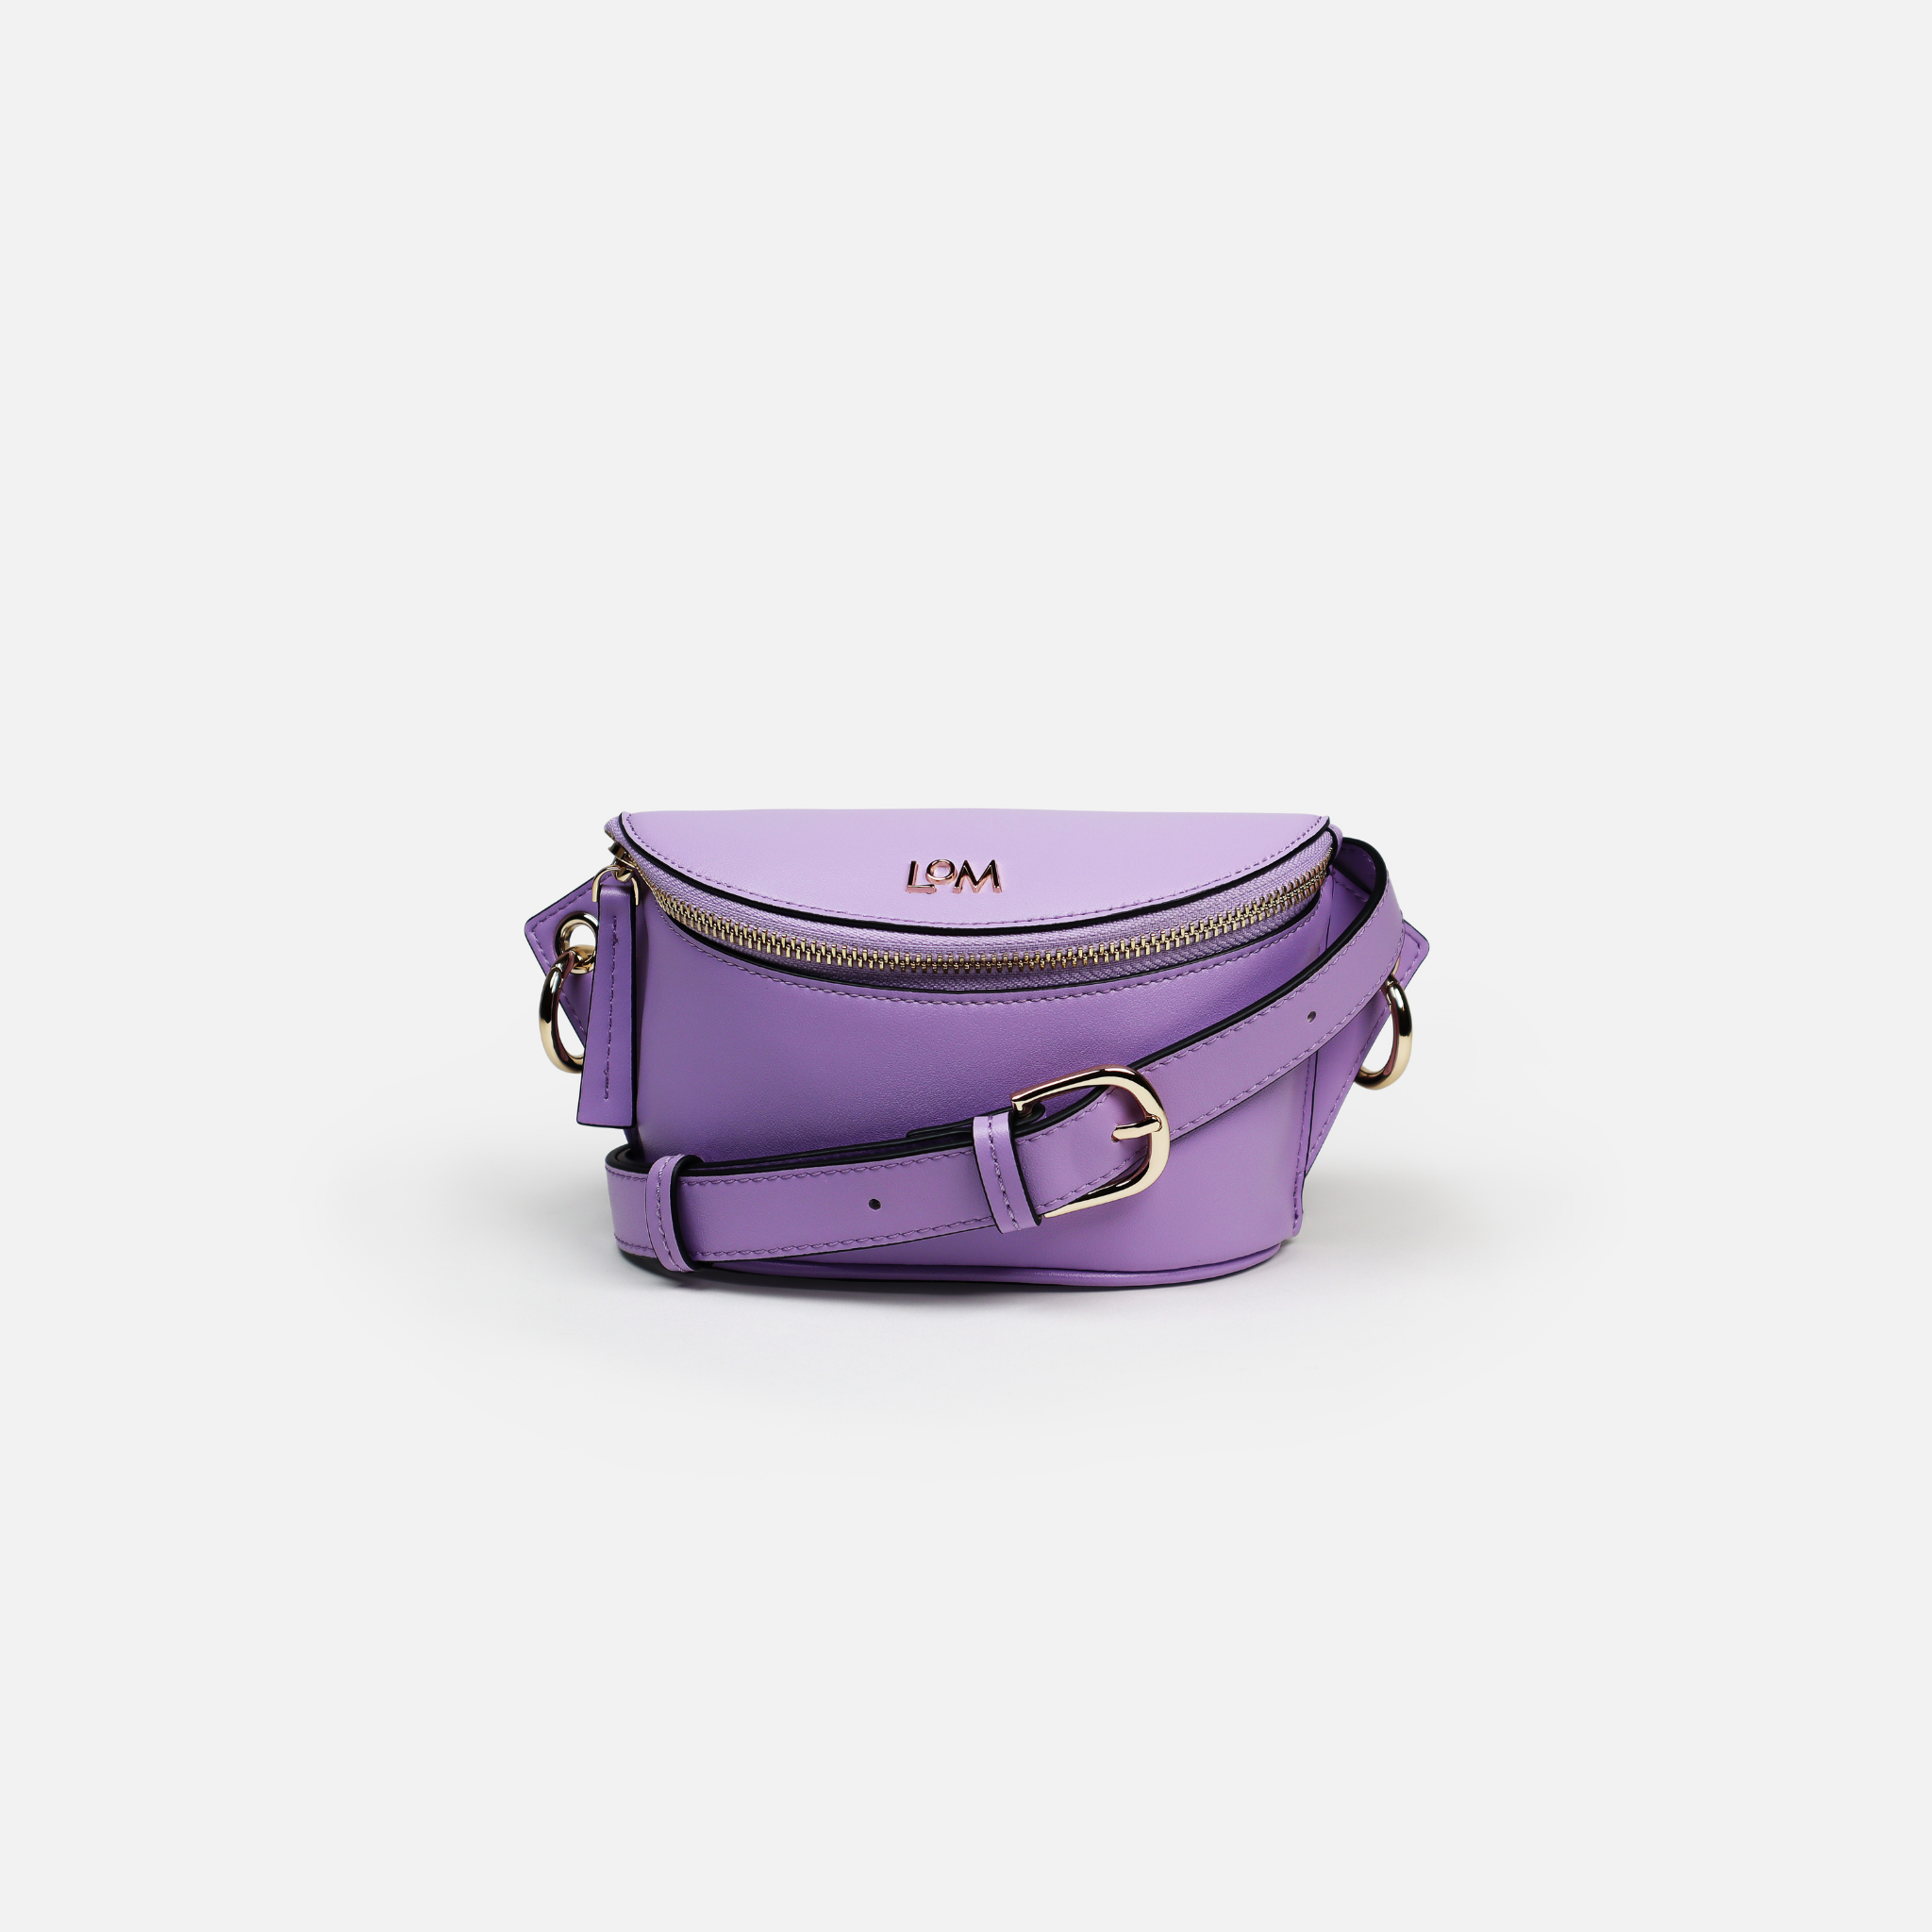 LOM Australia Leia Belt Bag in lilac. Front side with light gold zip to open main compartment which will house phone, keys, mask and lipstick. Adjustable belt strap to wear across body or around waist.